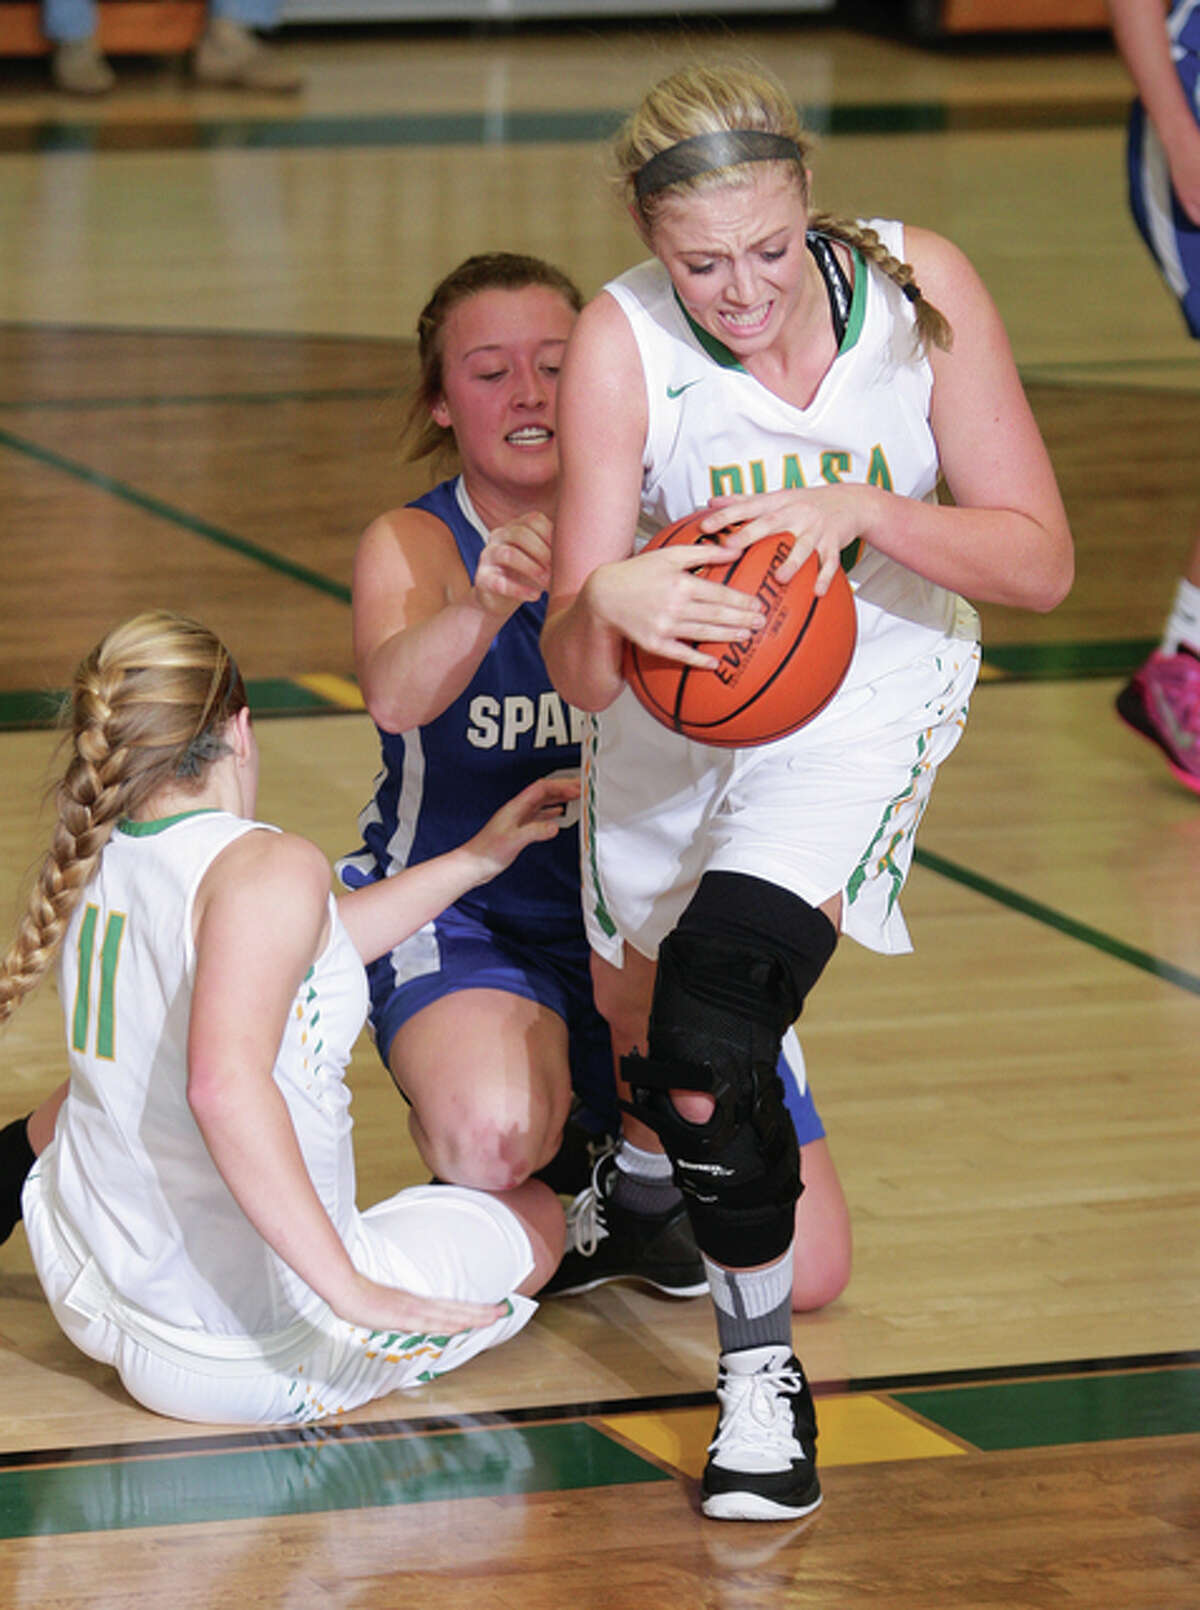 Southwestern’s Kelsey Rhoades (right) steps in to take a loose ball away from North Greene’s Makendra Jennings (middle) and the Piasa Birds’ Mackenzie Wolff during Tuesday night’s nonconference girls basketball game in Piasa.